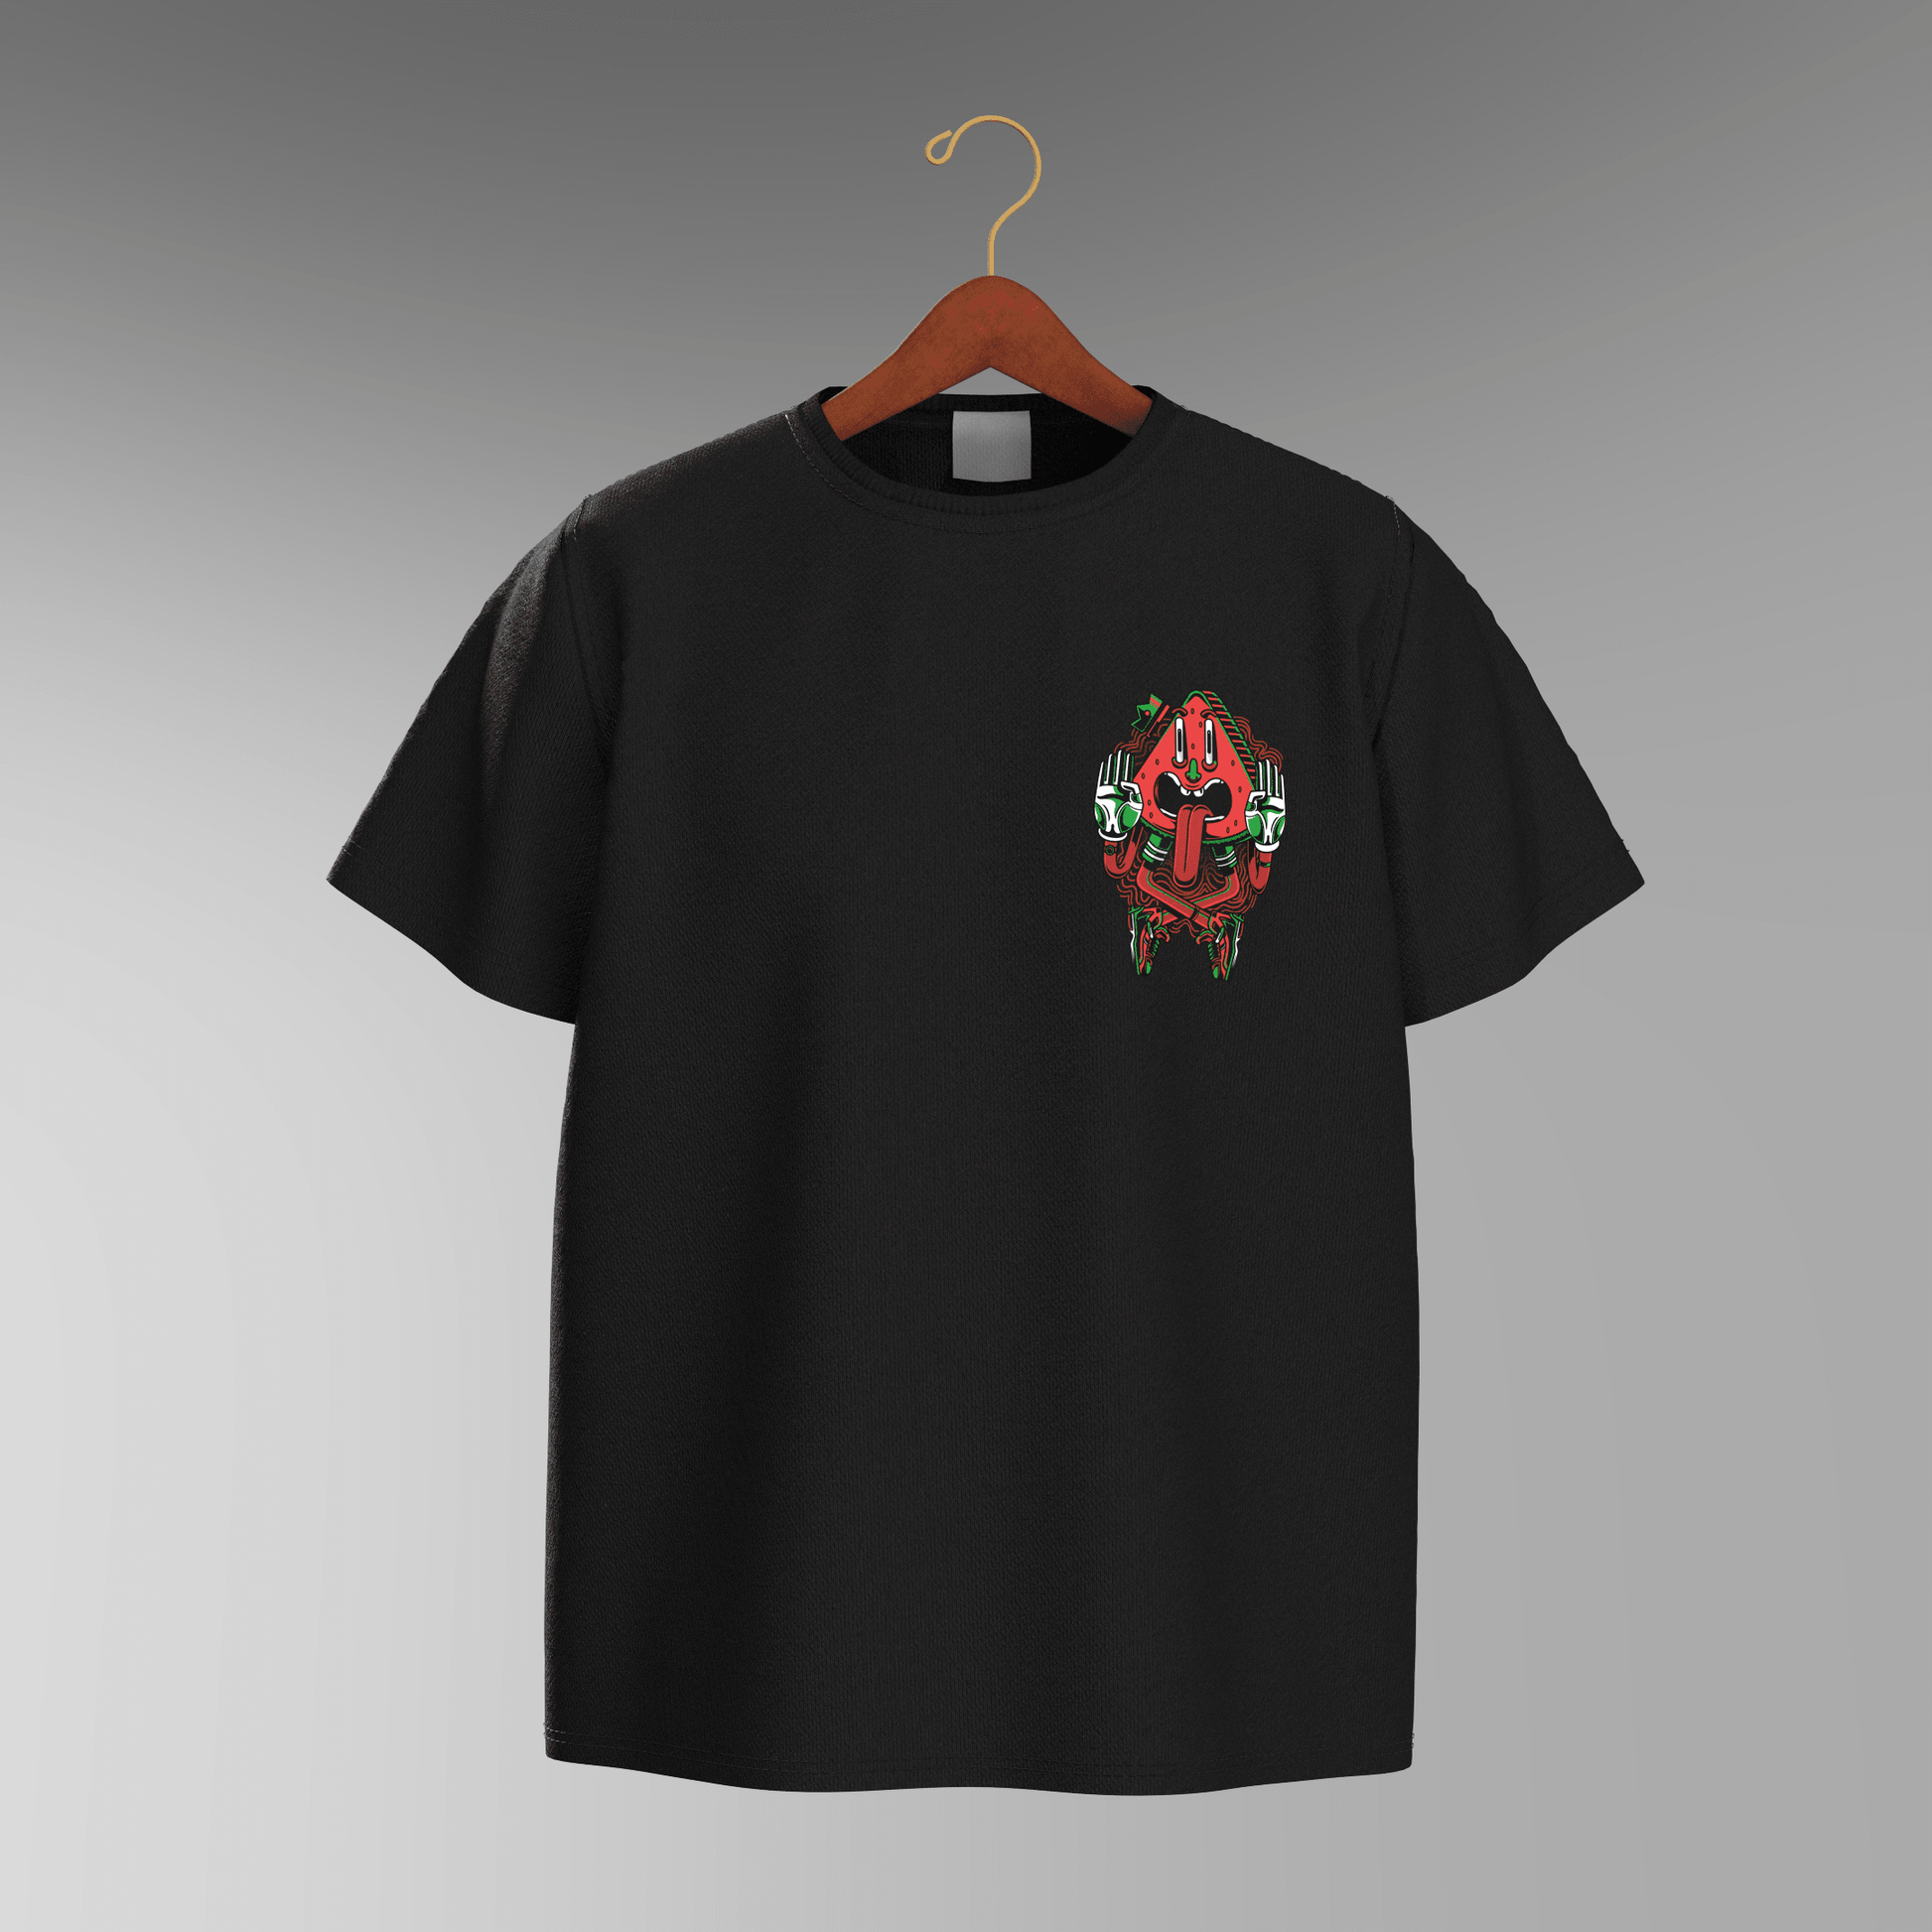 MICRO DOSE OVERSIZE T-SHIRT - FROM THE STREETS